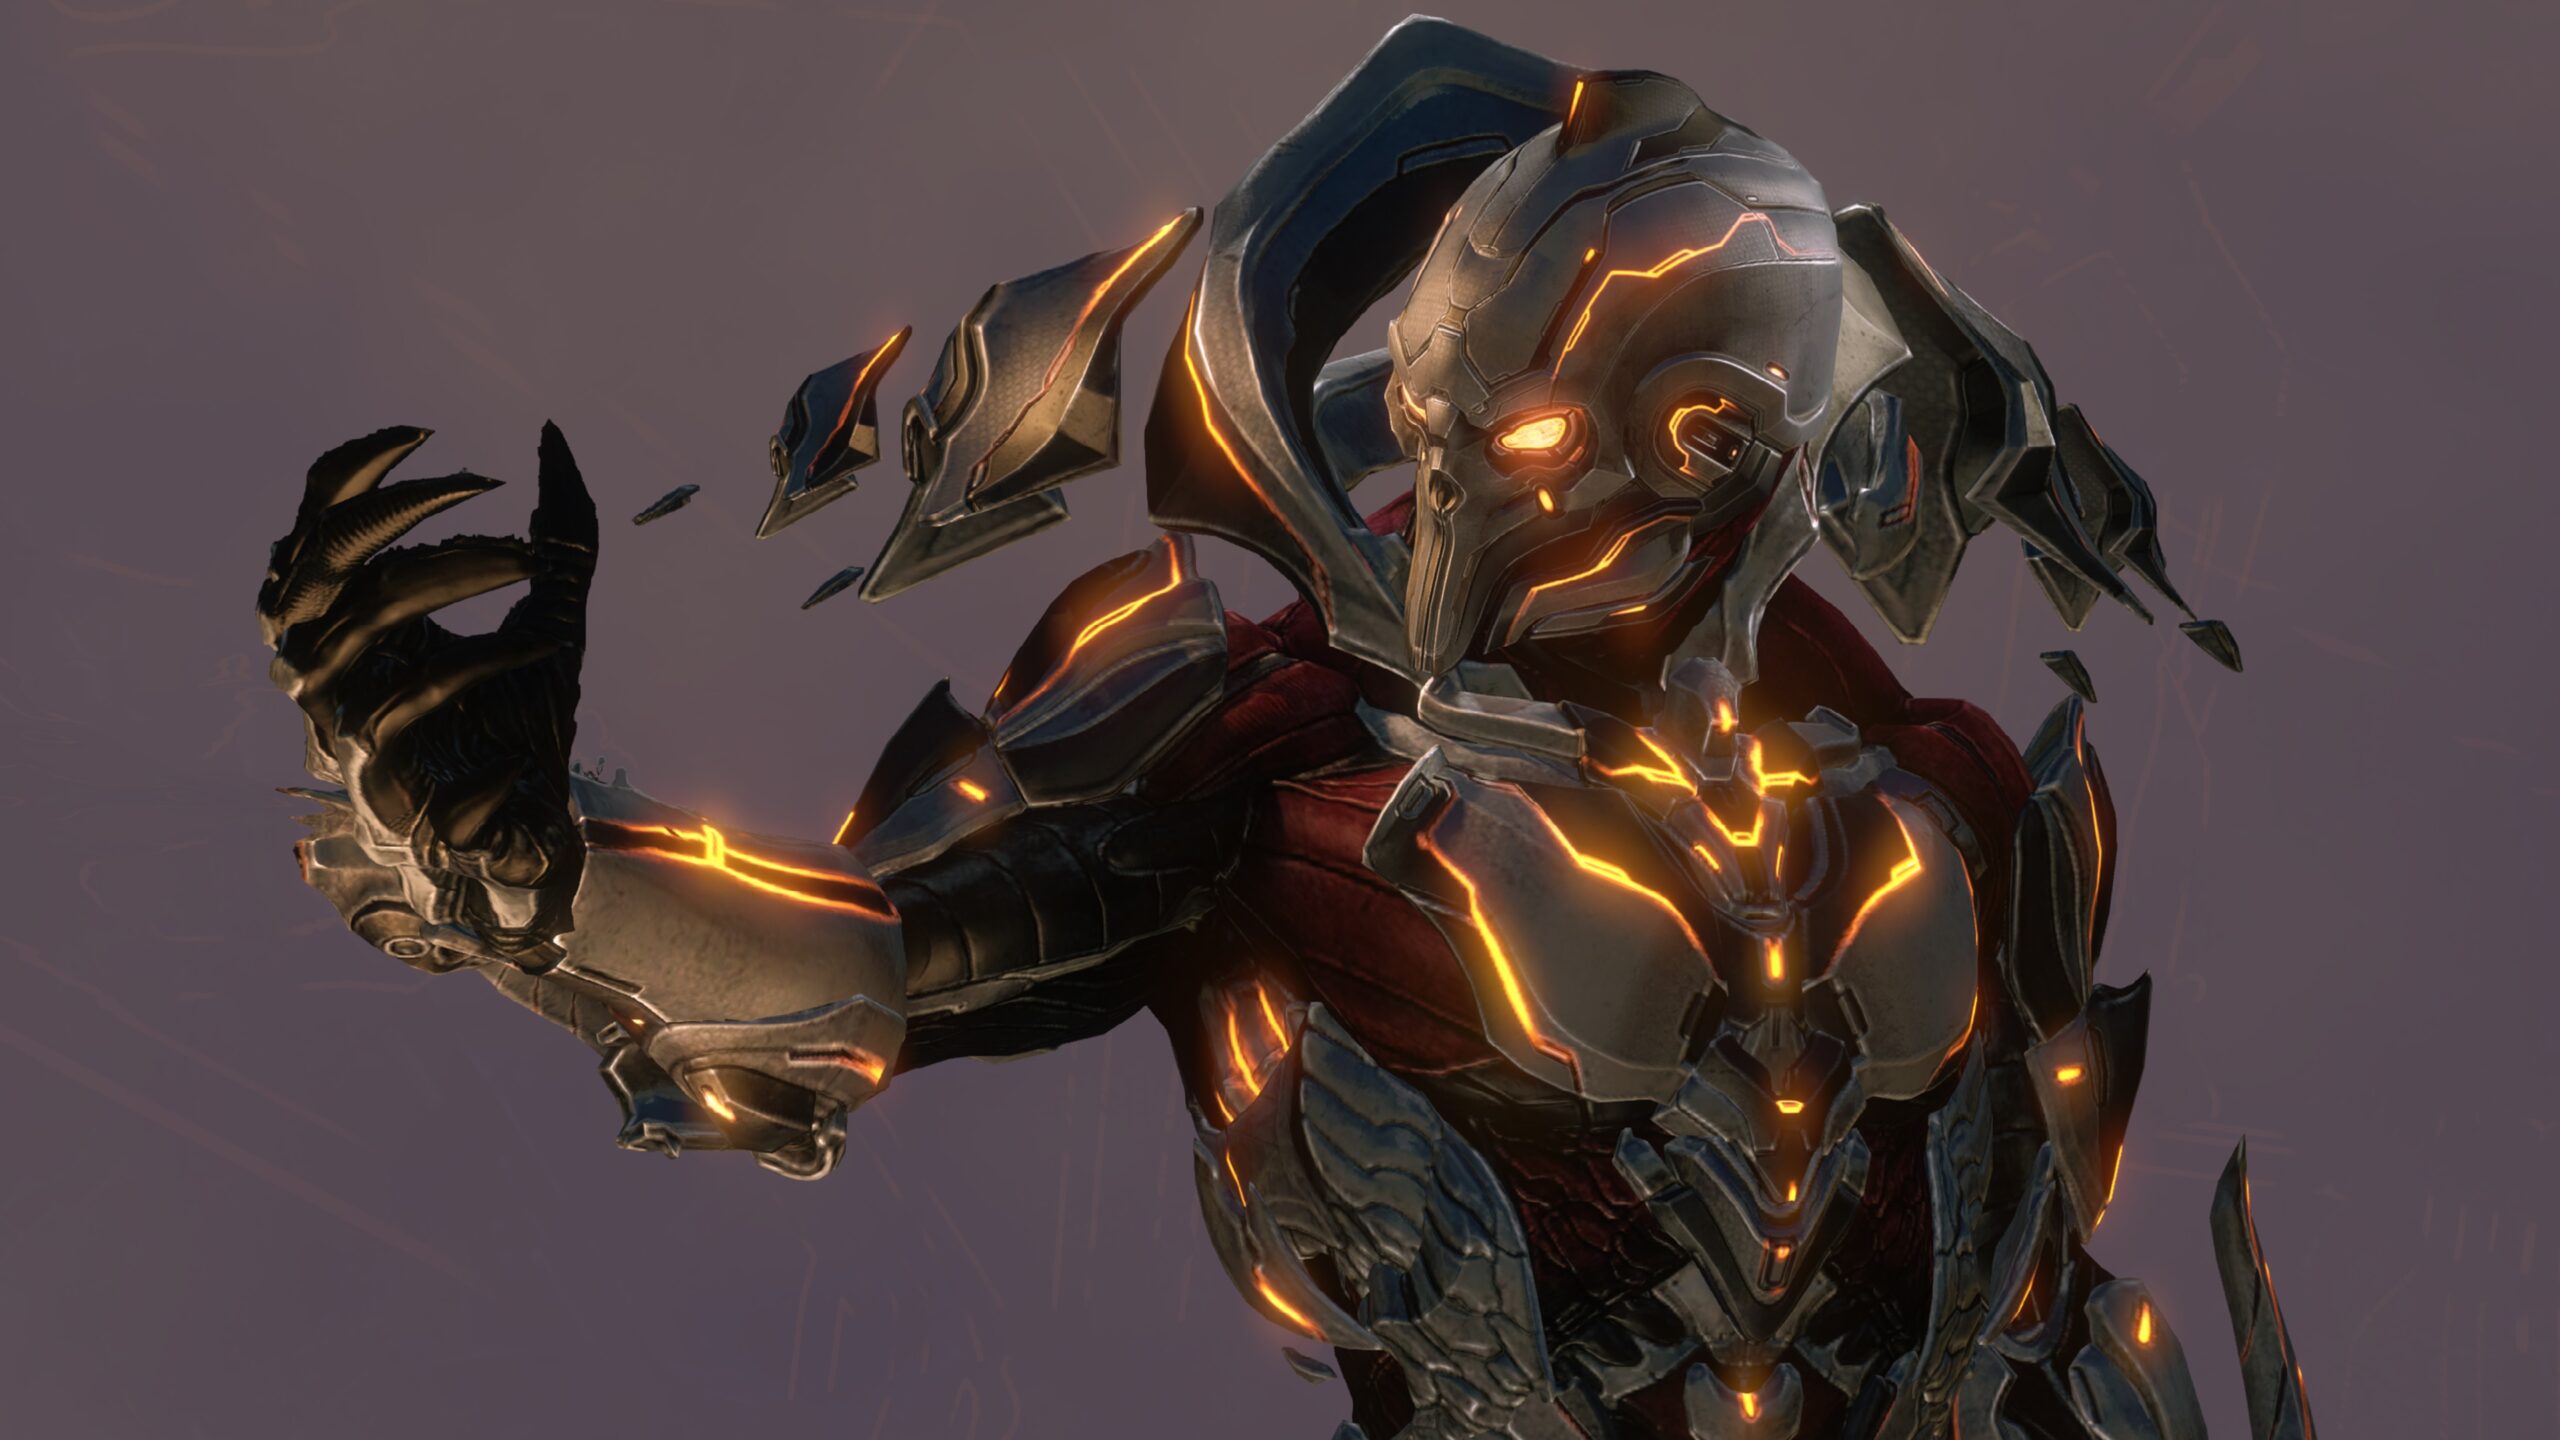 Halo 4 screenshot of the Didact in his combat skin